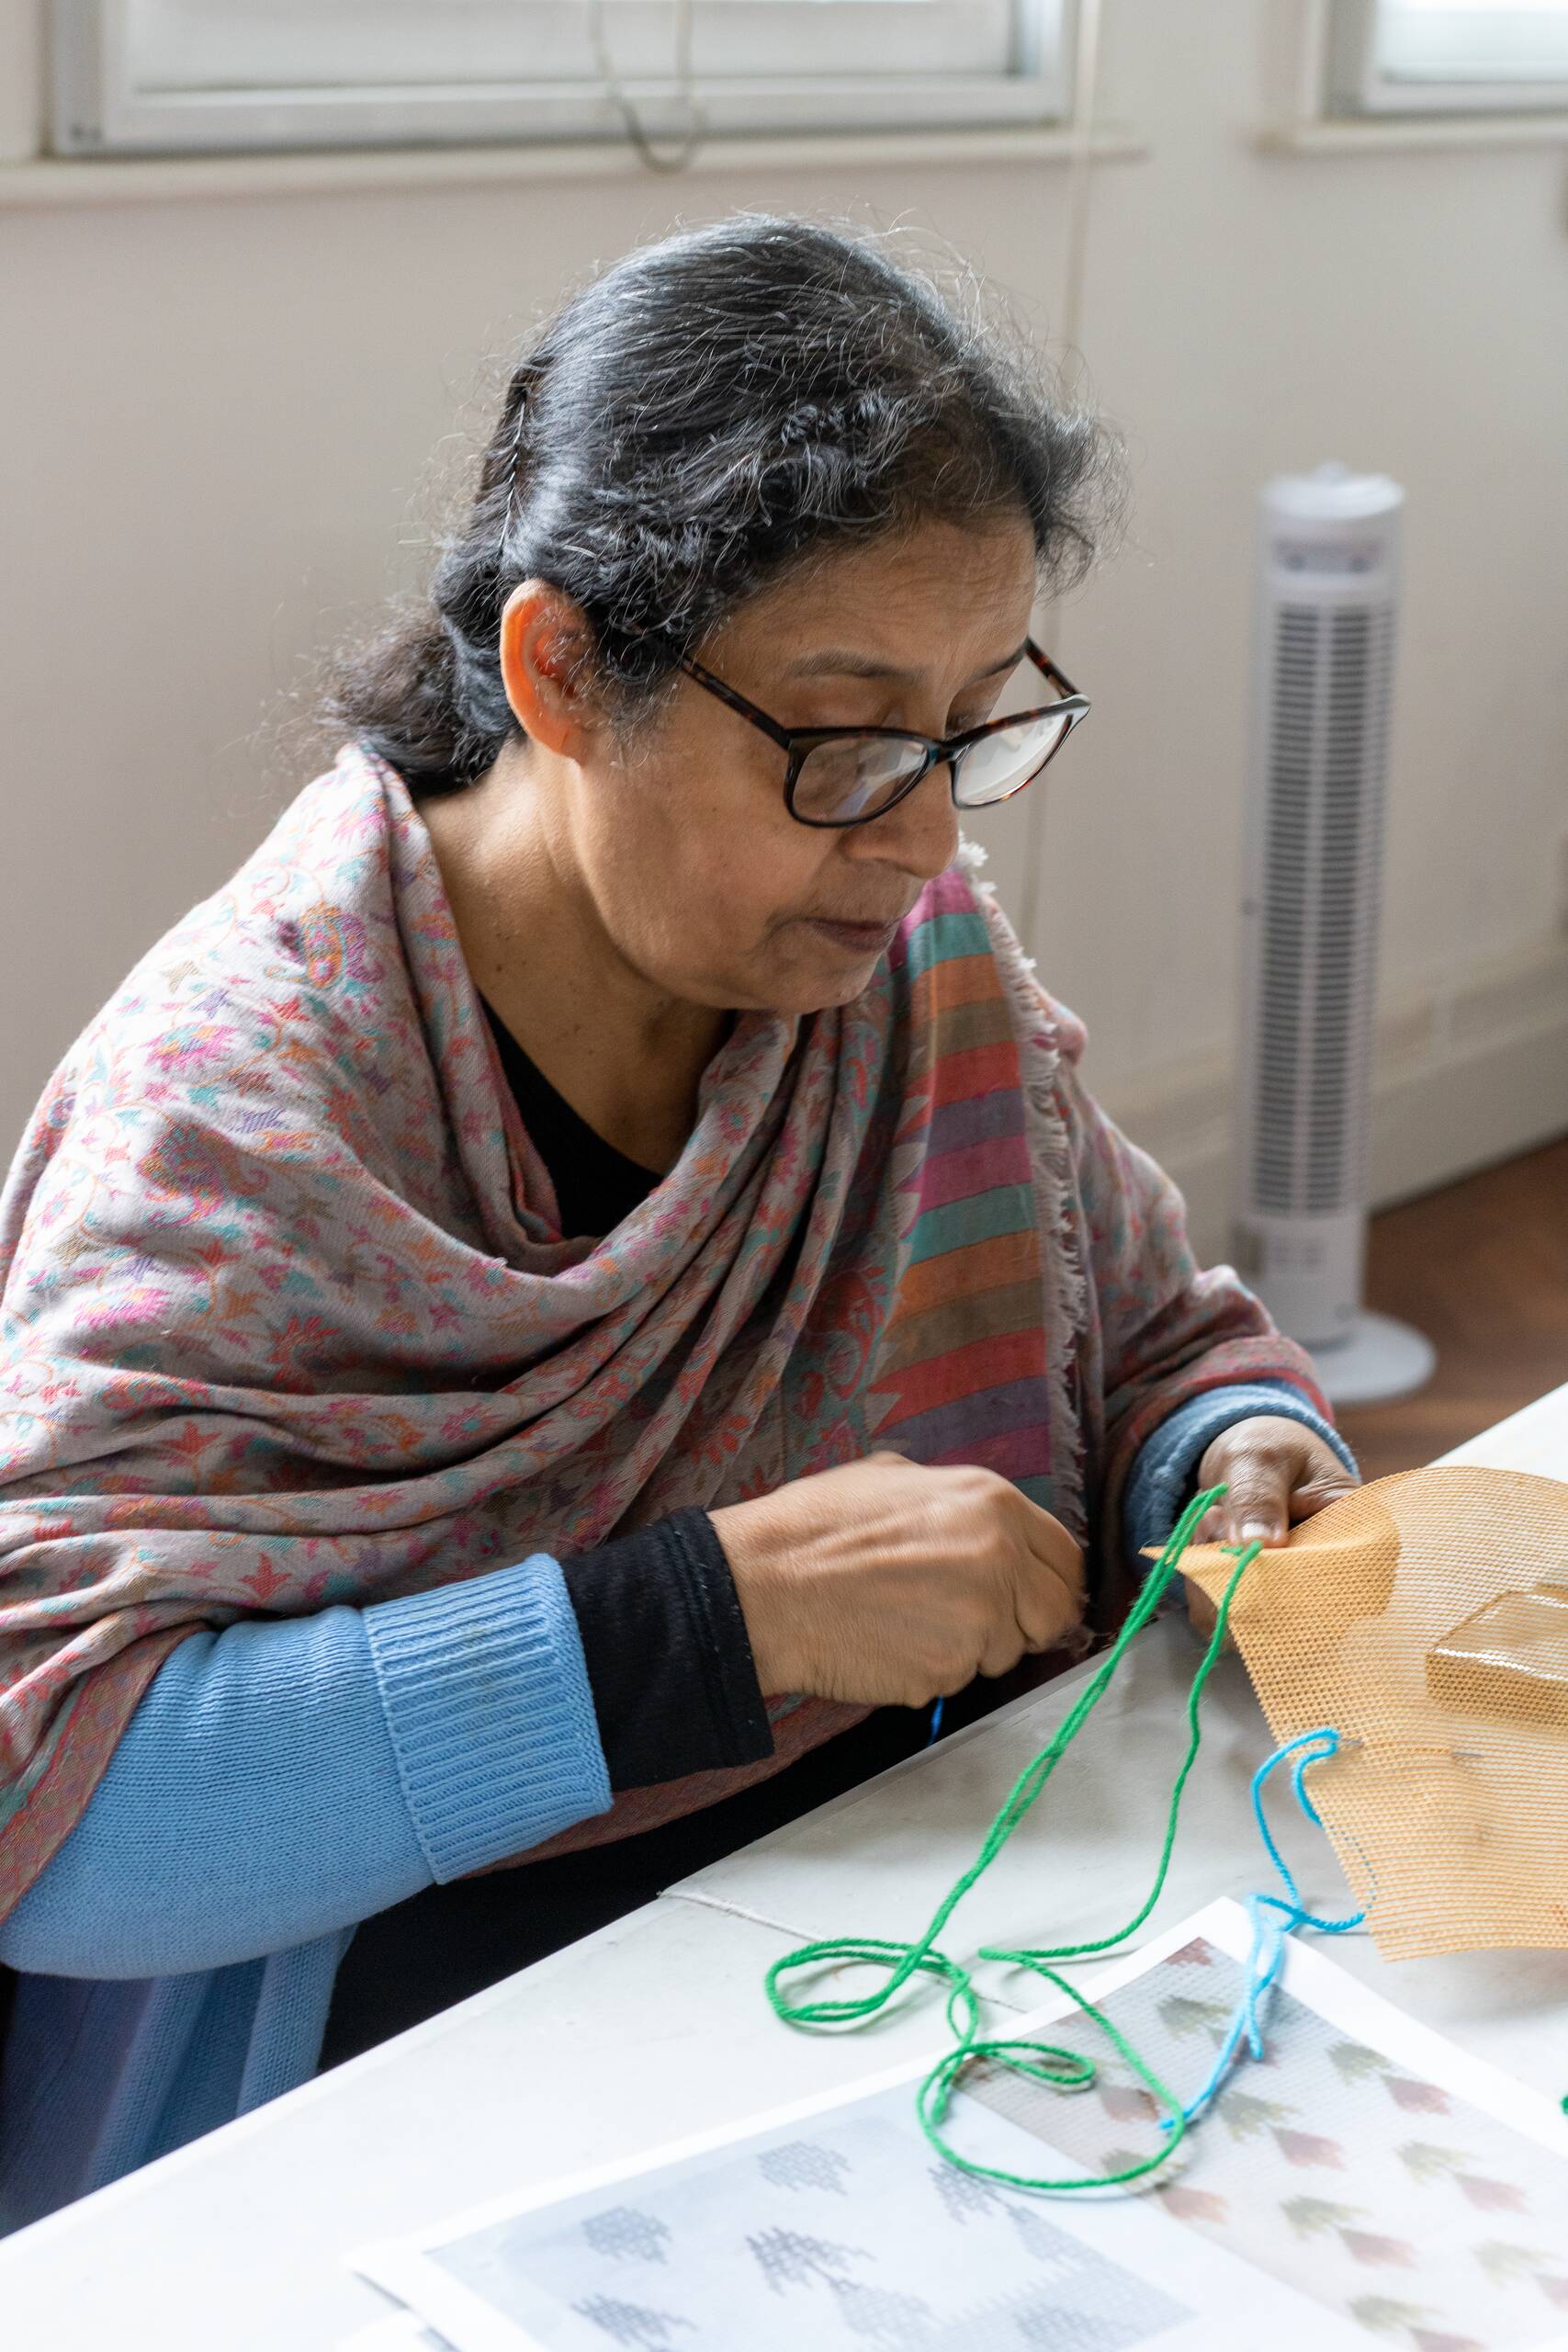 Mammoth Loop: A stitch in time, Series of 15 textile workshops with Redbridge Borough seniors, held at SPACE studios in collaboration with Age UK, London UK, 2021